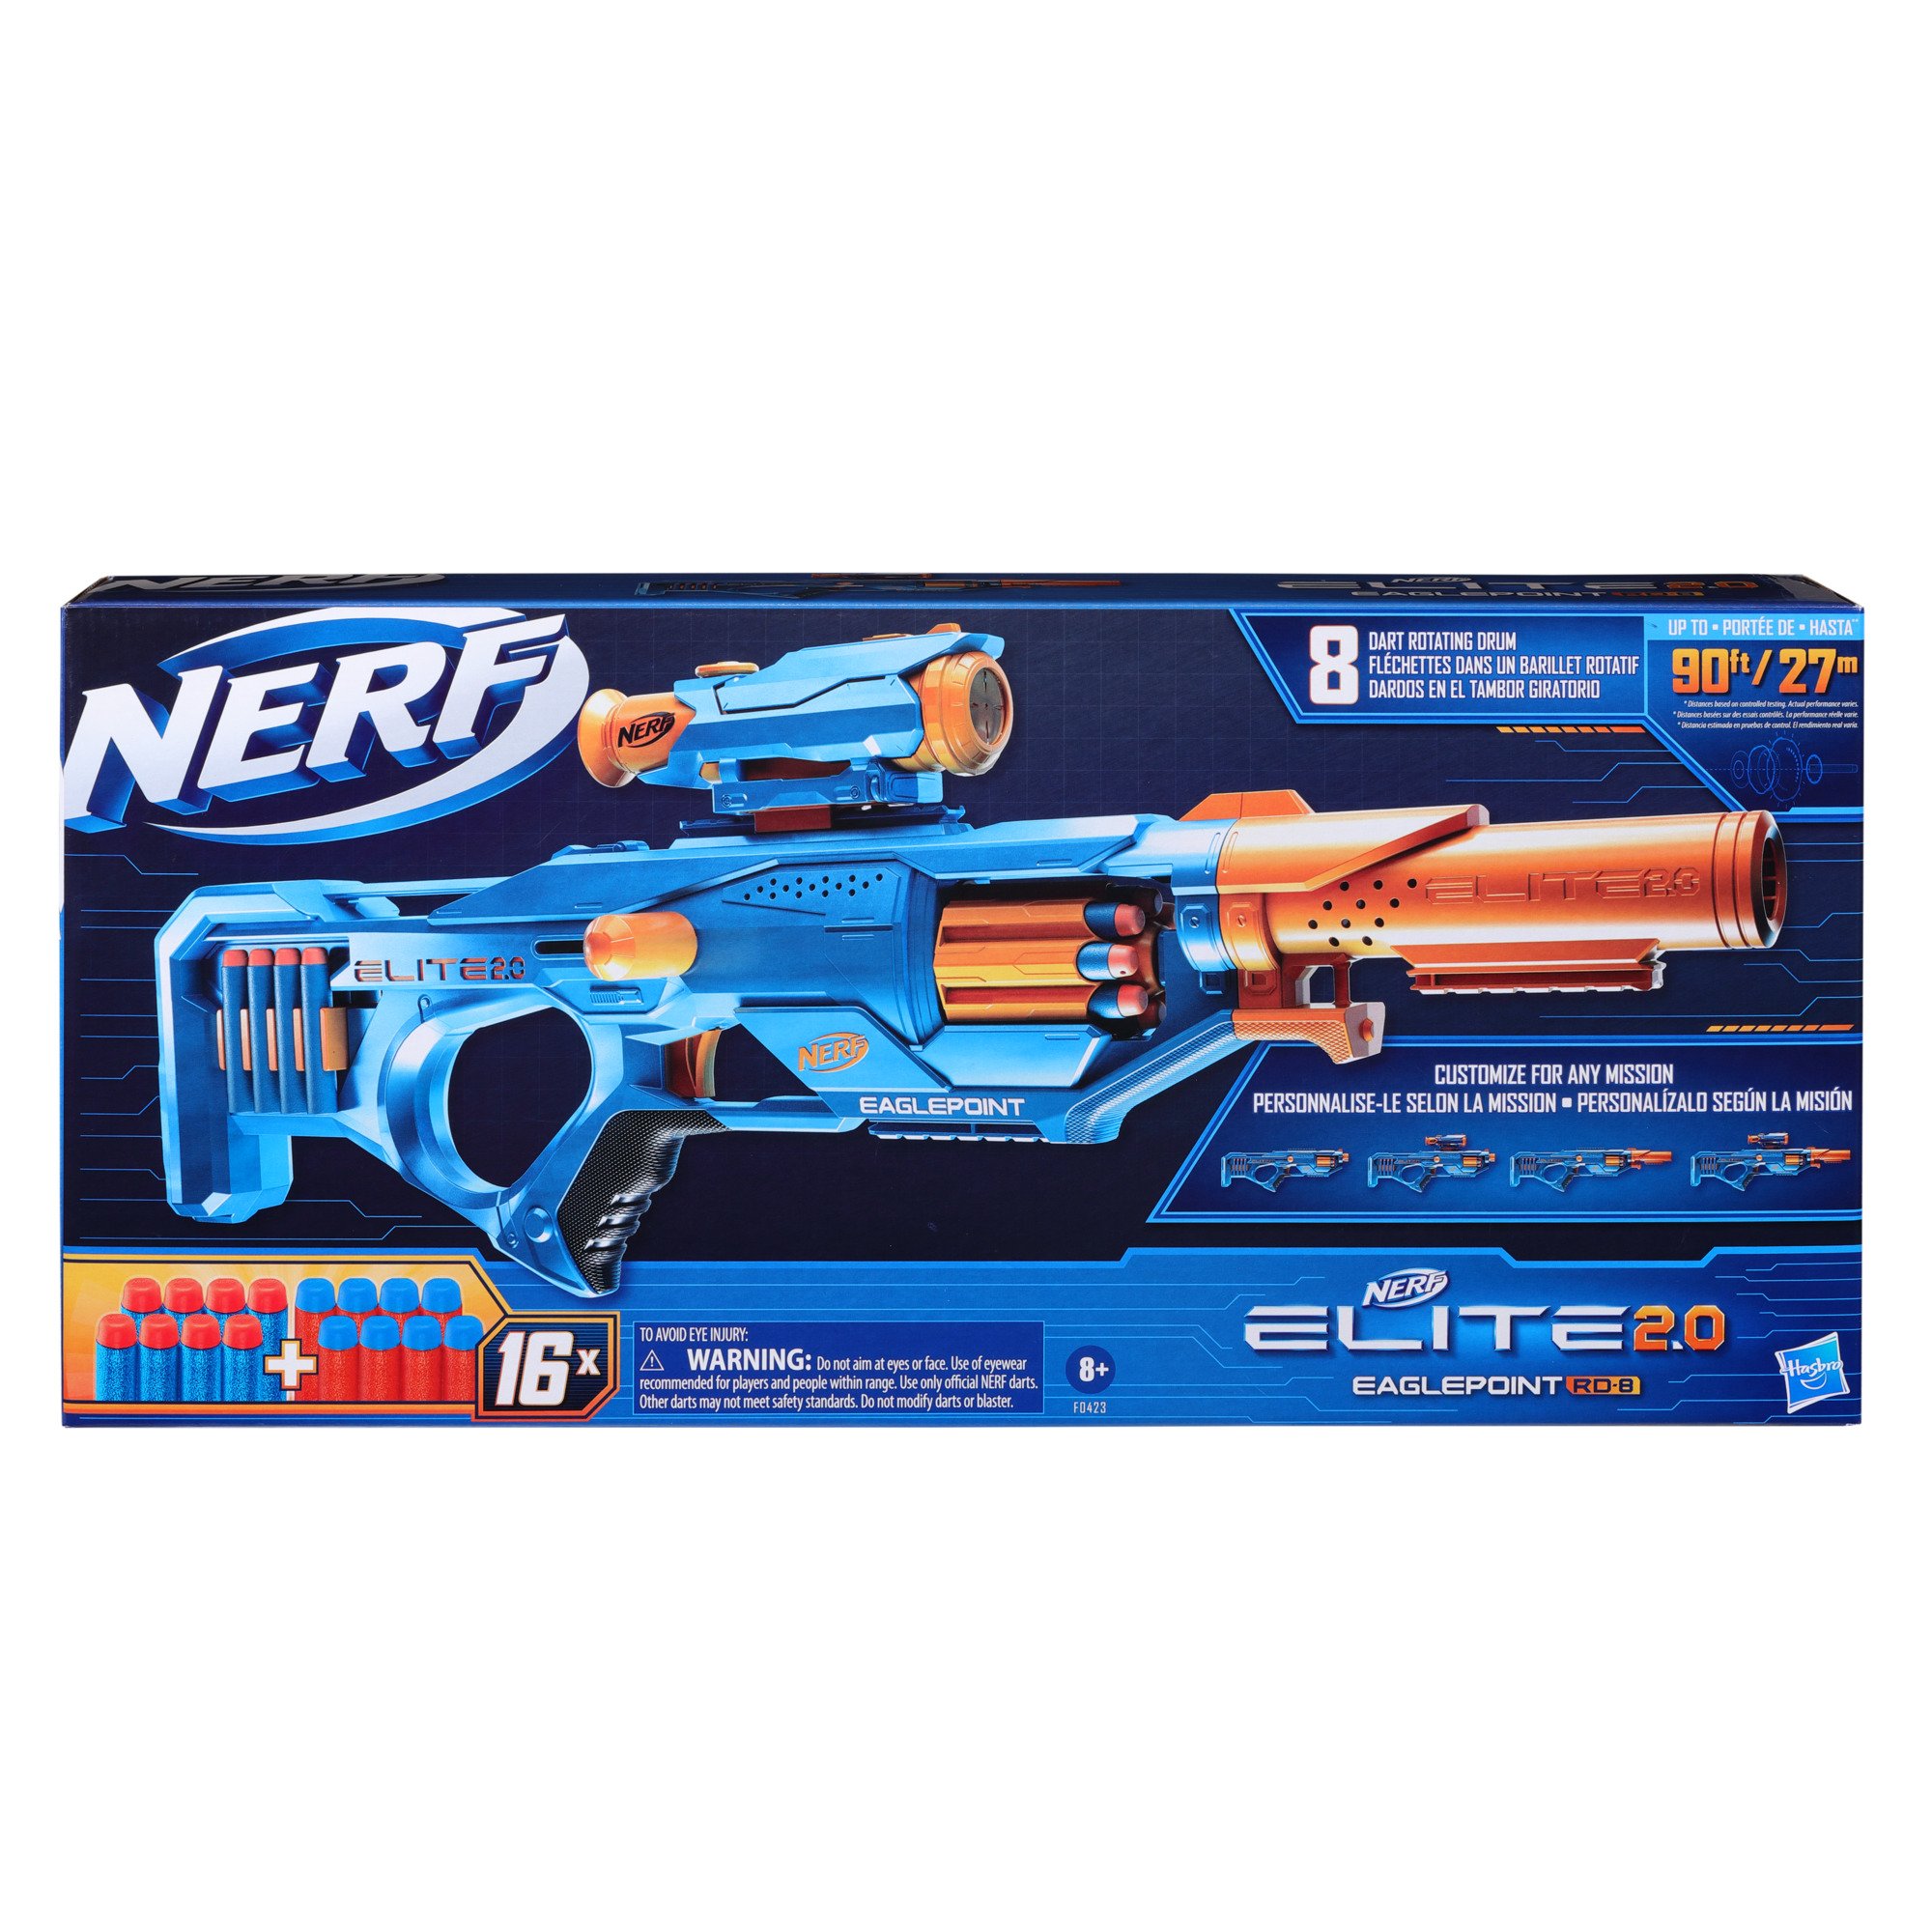 Nerf 2.0 Eaglepoint RD-8 Dart - Shop Blasters at